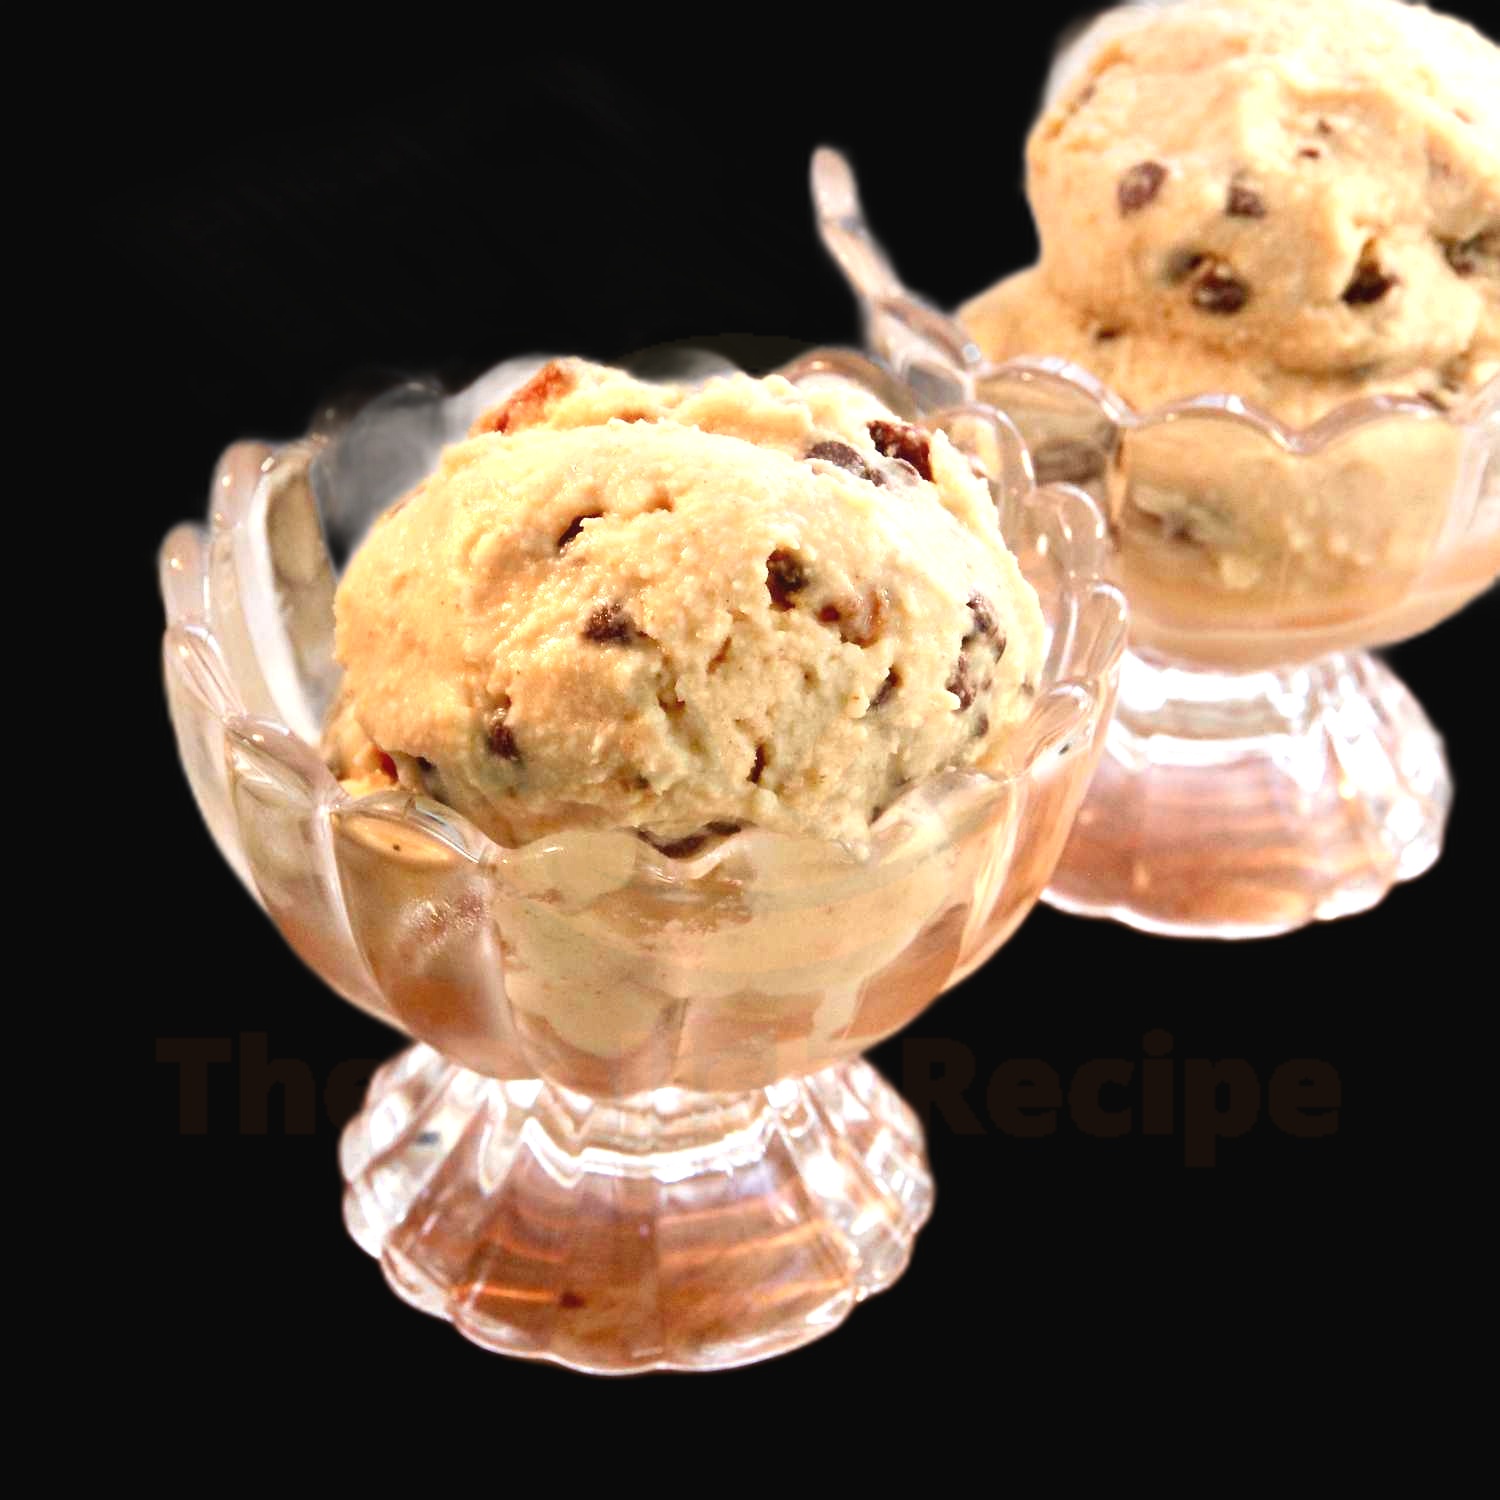 Peanut Butter, Chocolate Chip, and Bacon Ice Cream